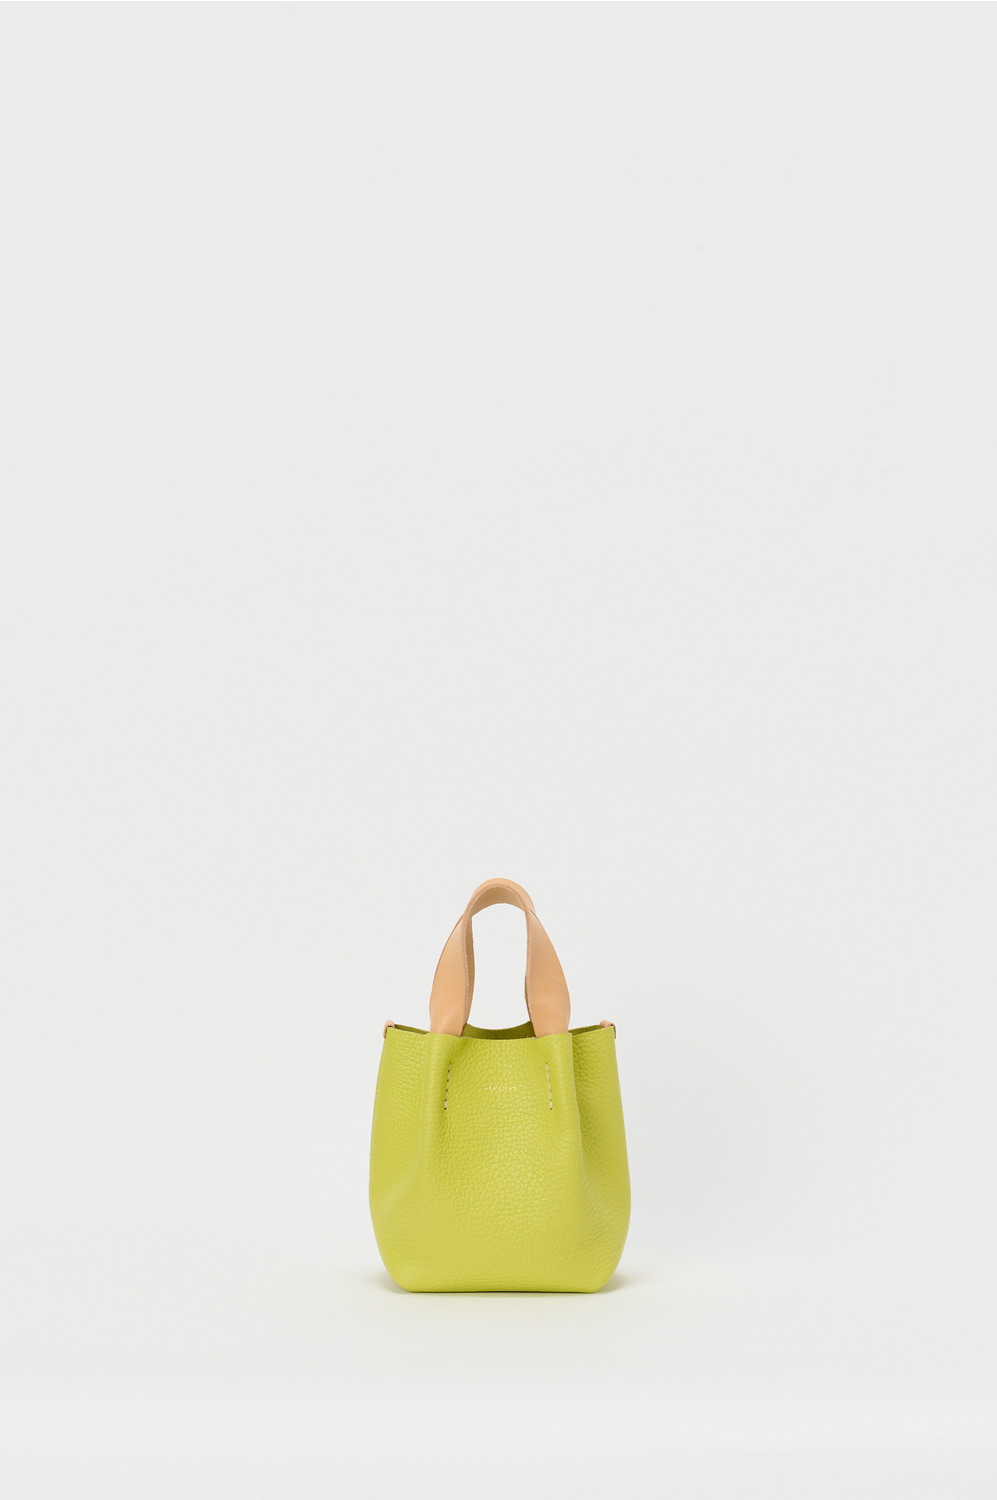 piano bag small 詳細画像 lime green 1